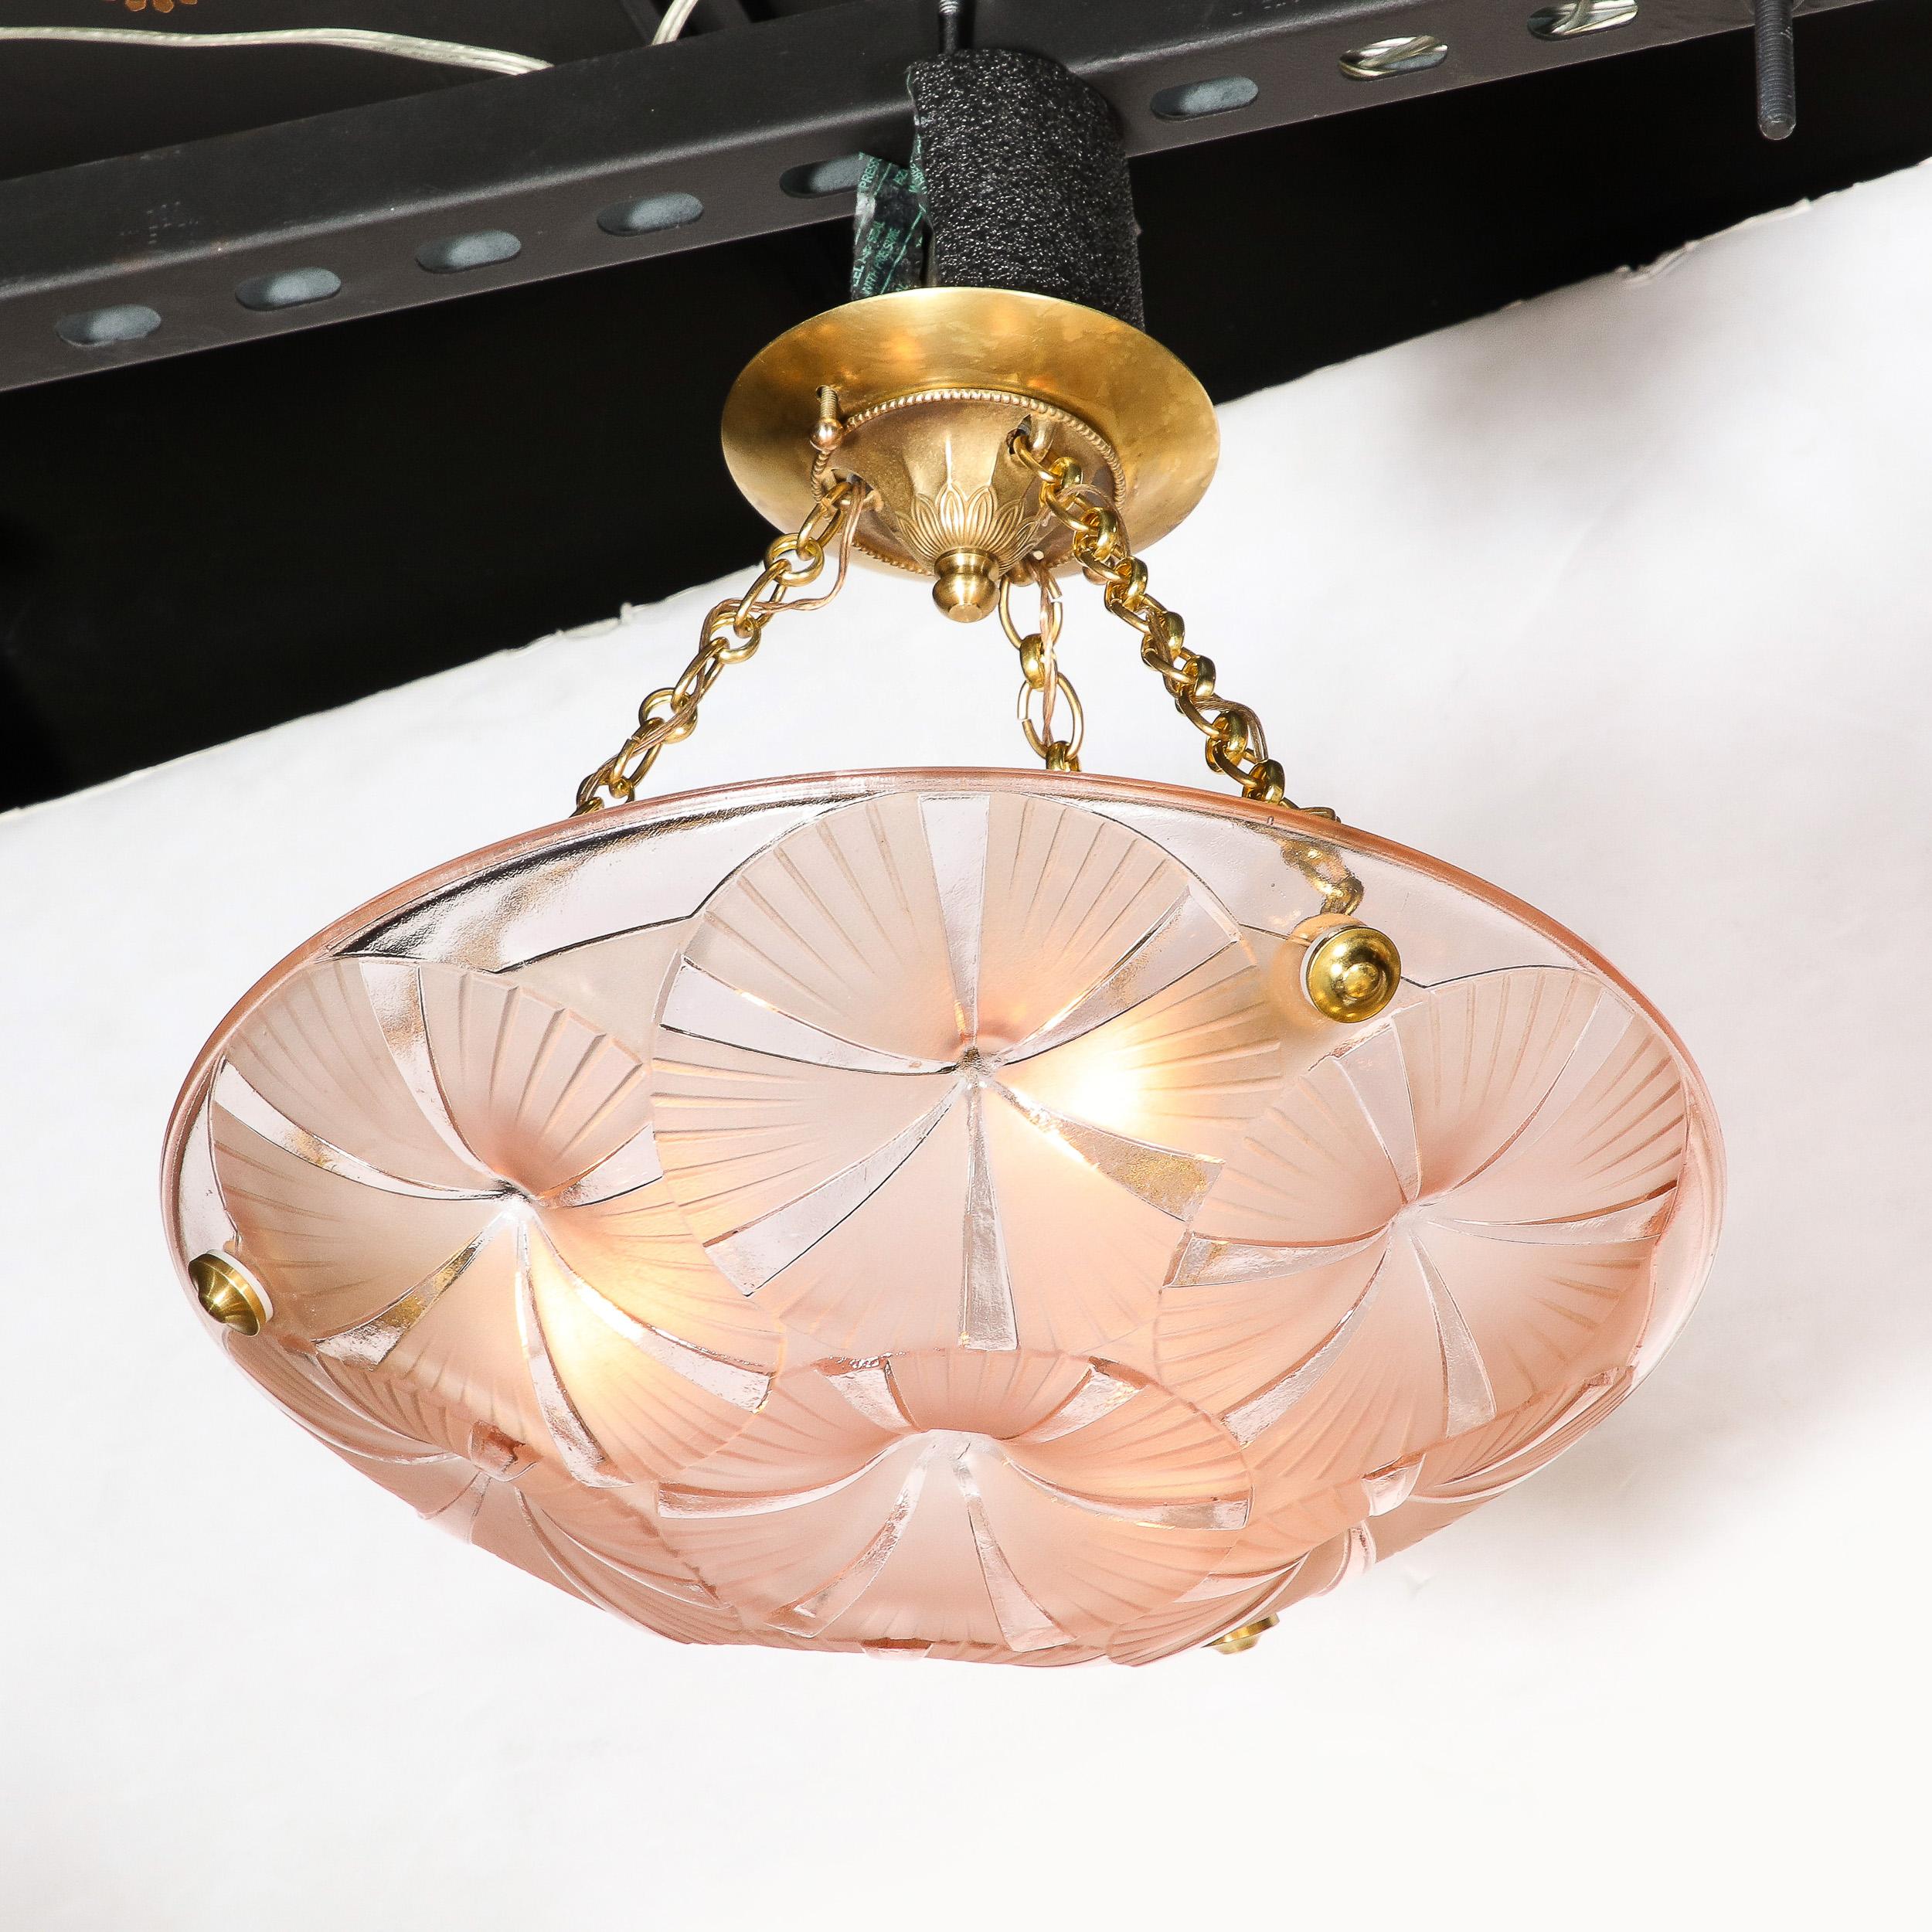 This alluring and materially exquisite Pair of Art Deco Pendant Chandeliers in Molded & Frosted Rose Glass are signed Degue and they originate from France, Circa 1930. Featuring a single rose hued molded glass shade with abstracted circular